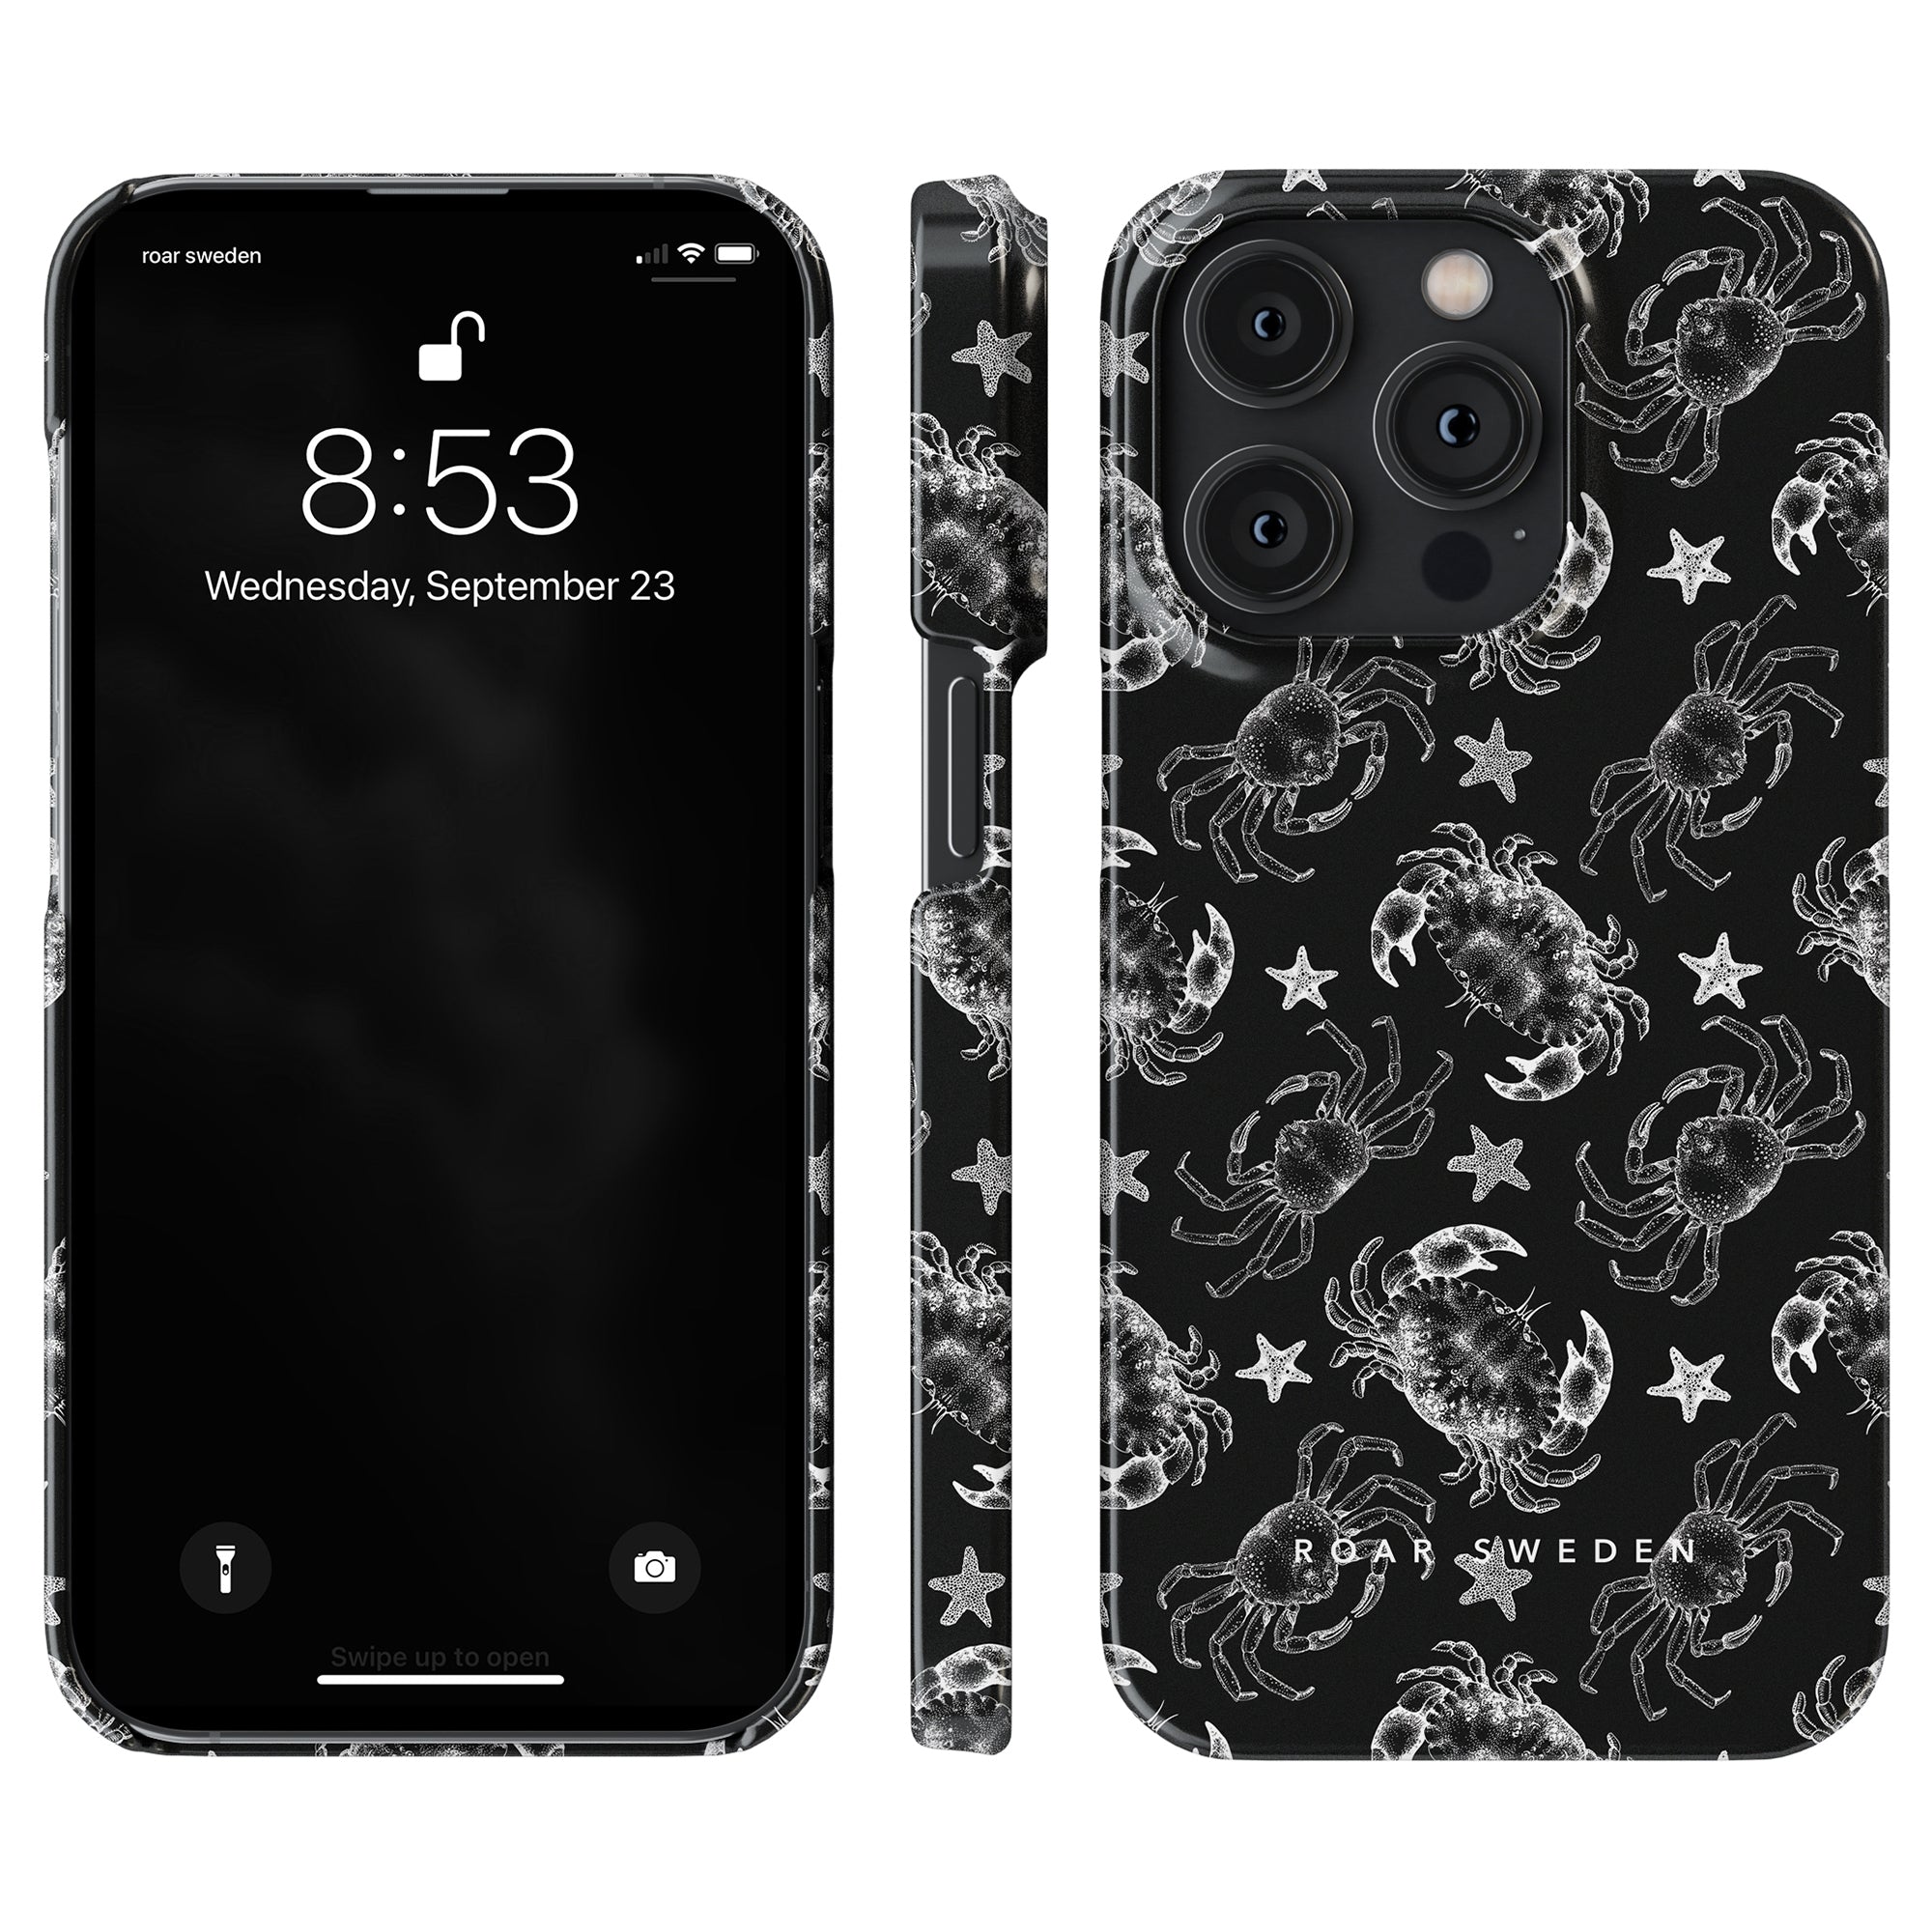 This Black Crab - Slim case from our Ocean Collection features white illustrations of crabs and starfish, with both sides beautifully visible, embodying a touch of marin elegans.